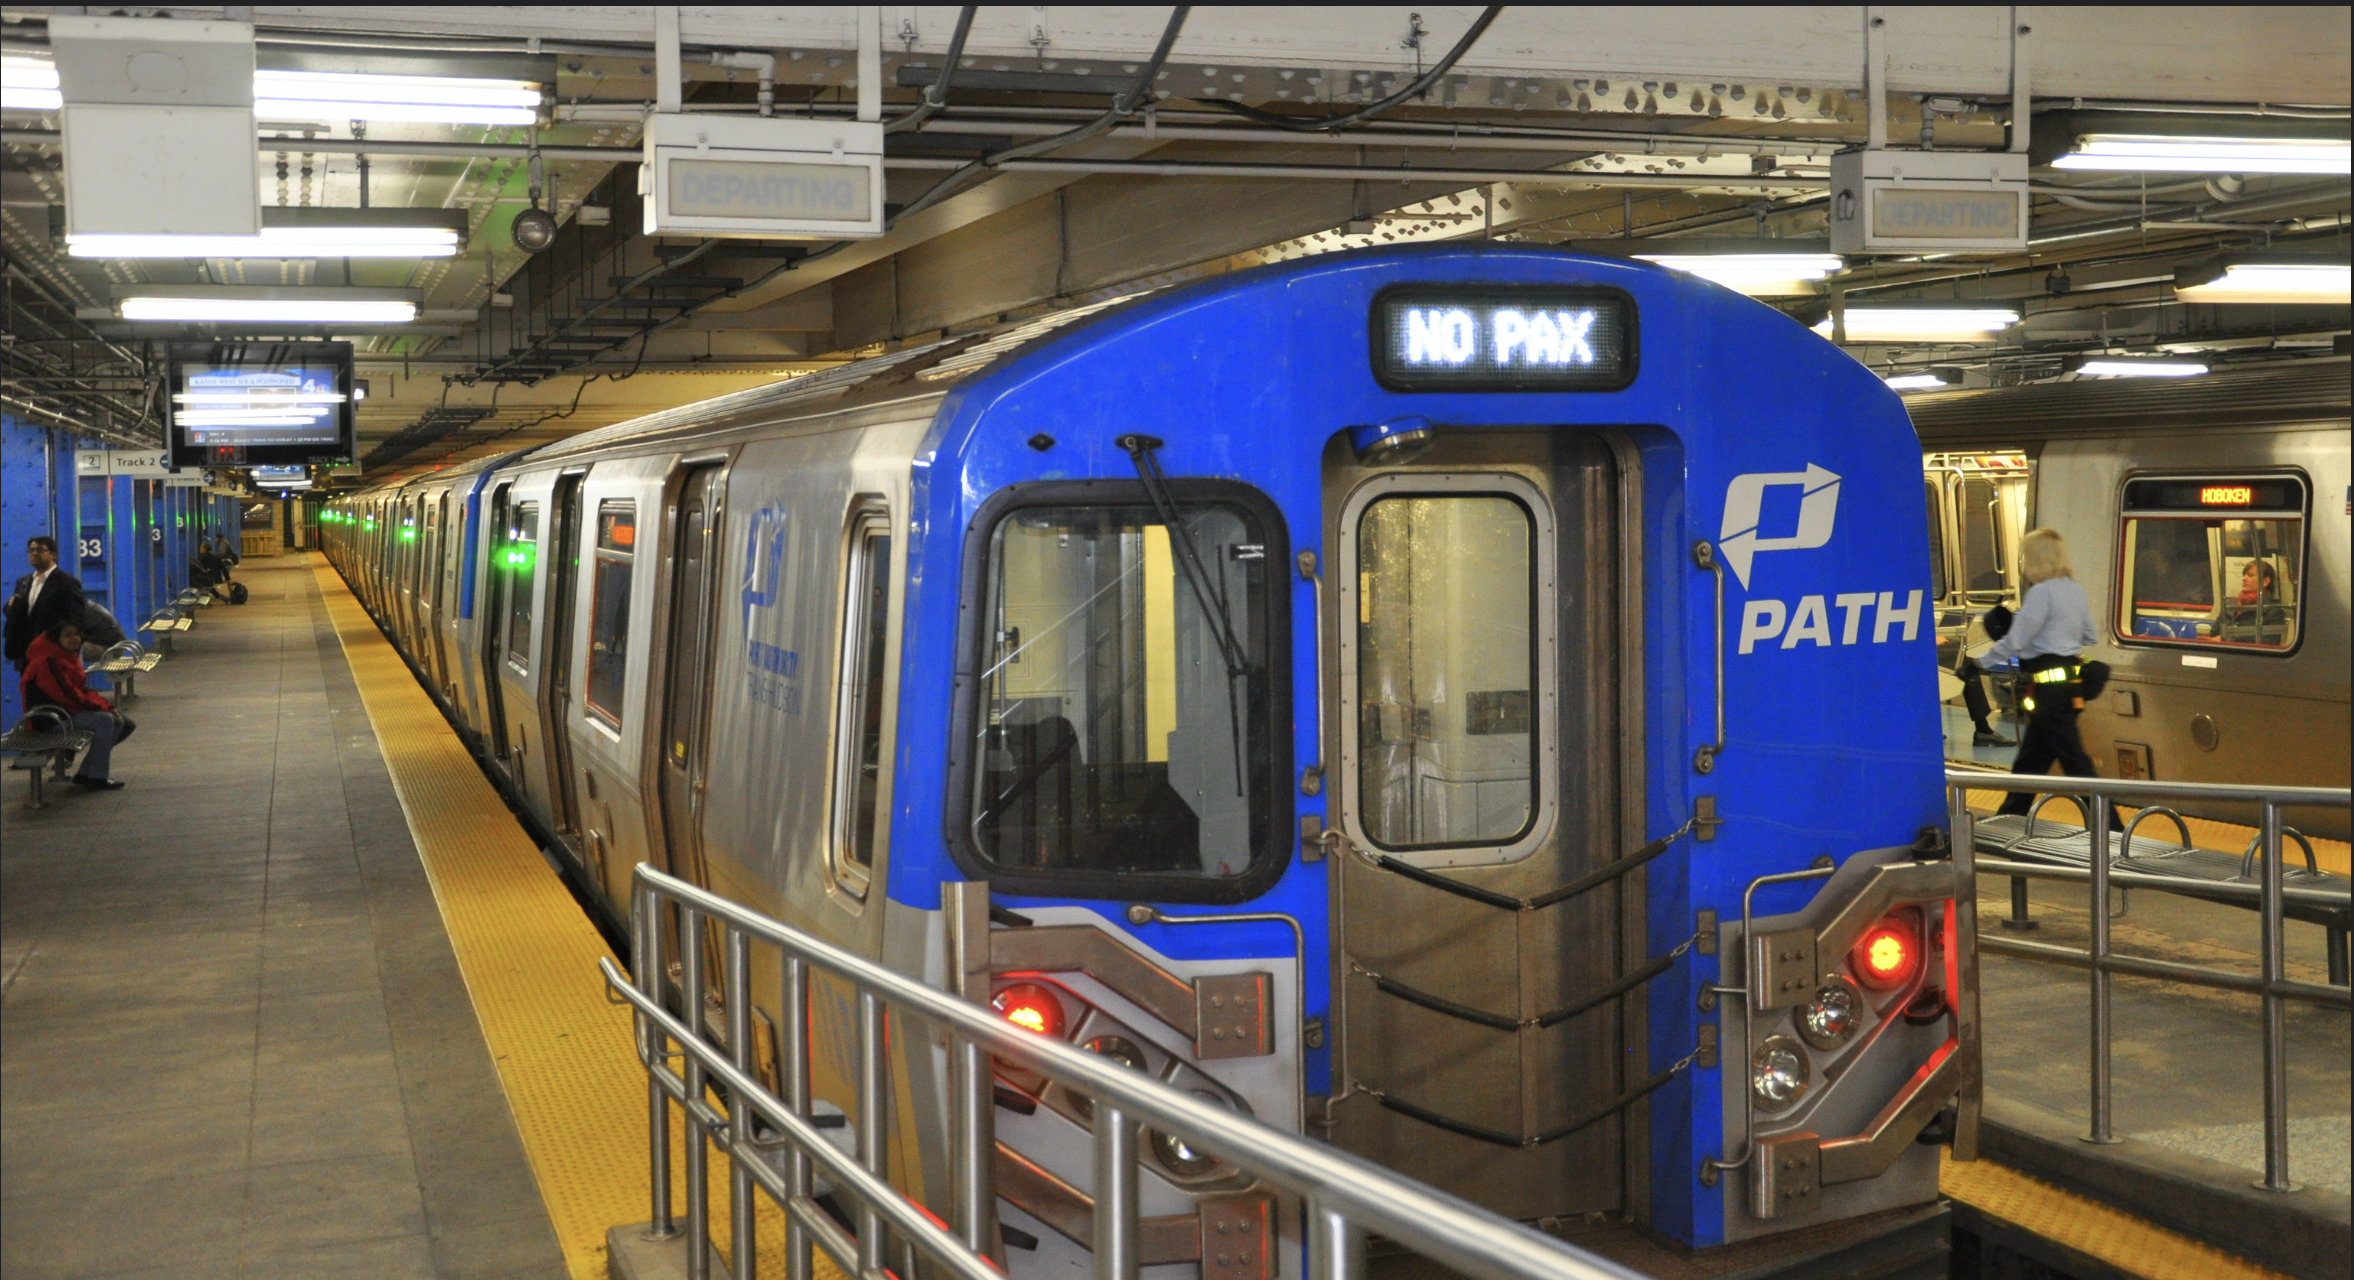 The PATH train between New York City and New Jersey.